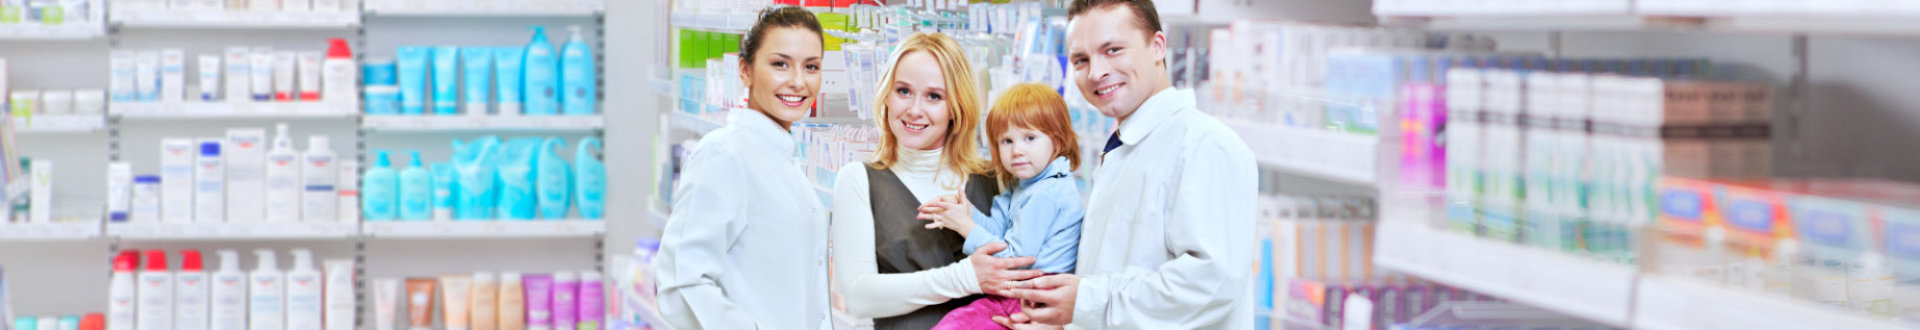 two pharmacists with woman and her daughter smiling